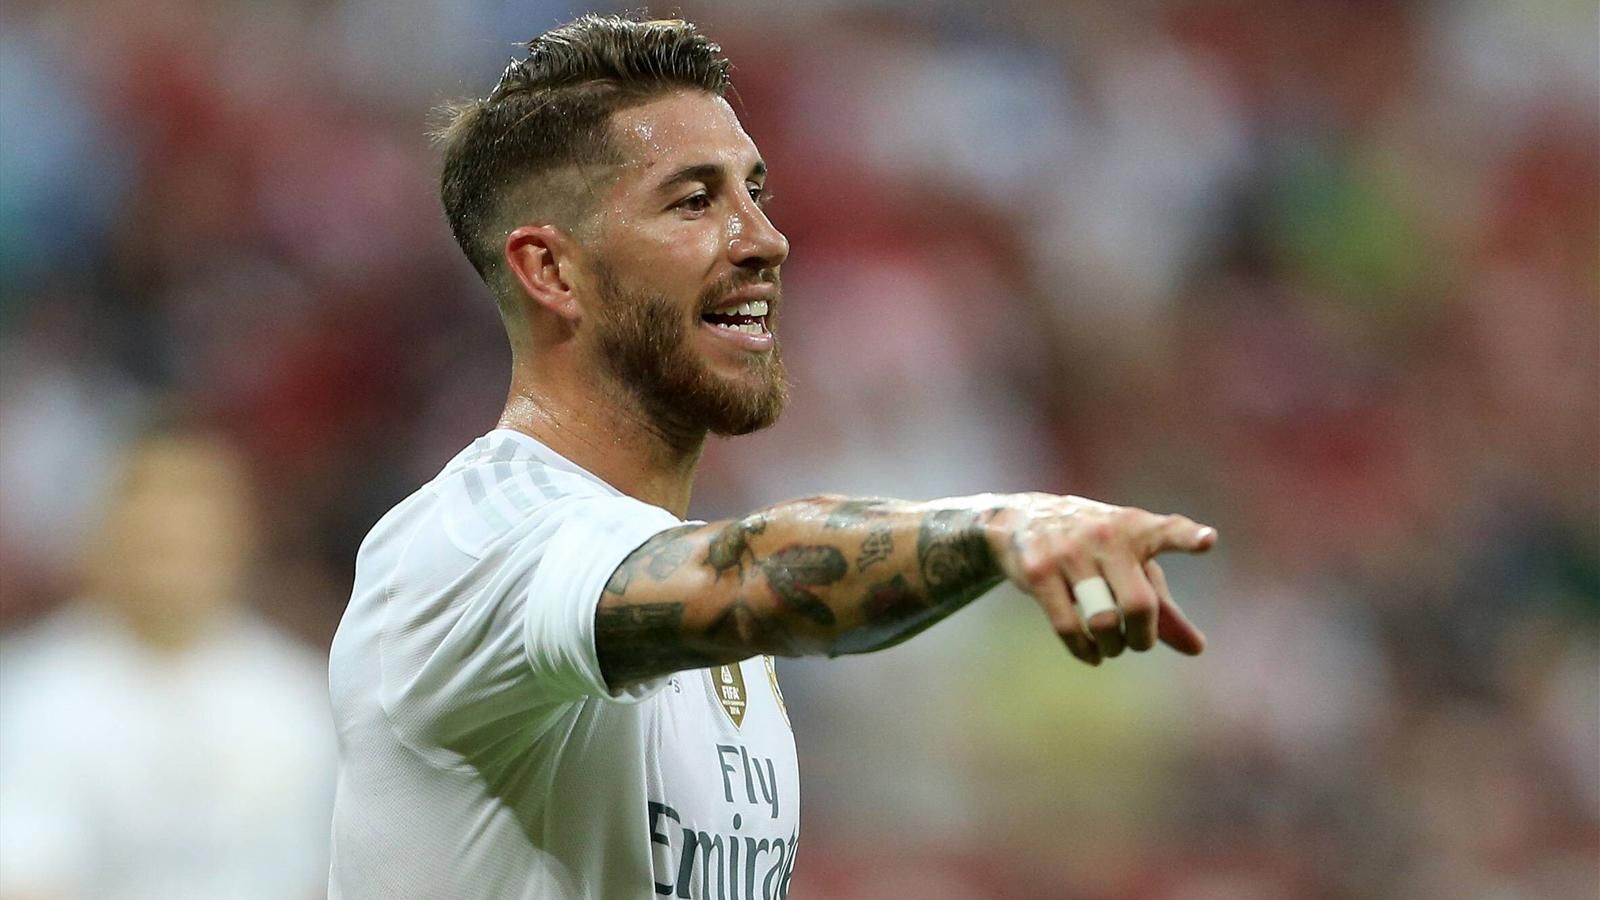 Sergio Ramos aims to end his career at Real Madrid